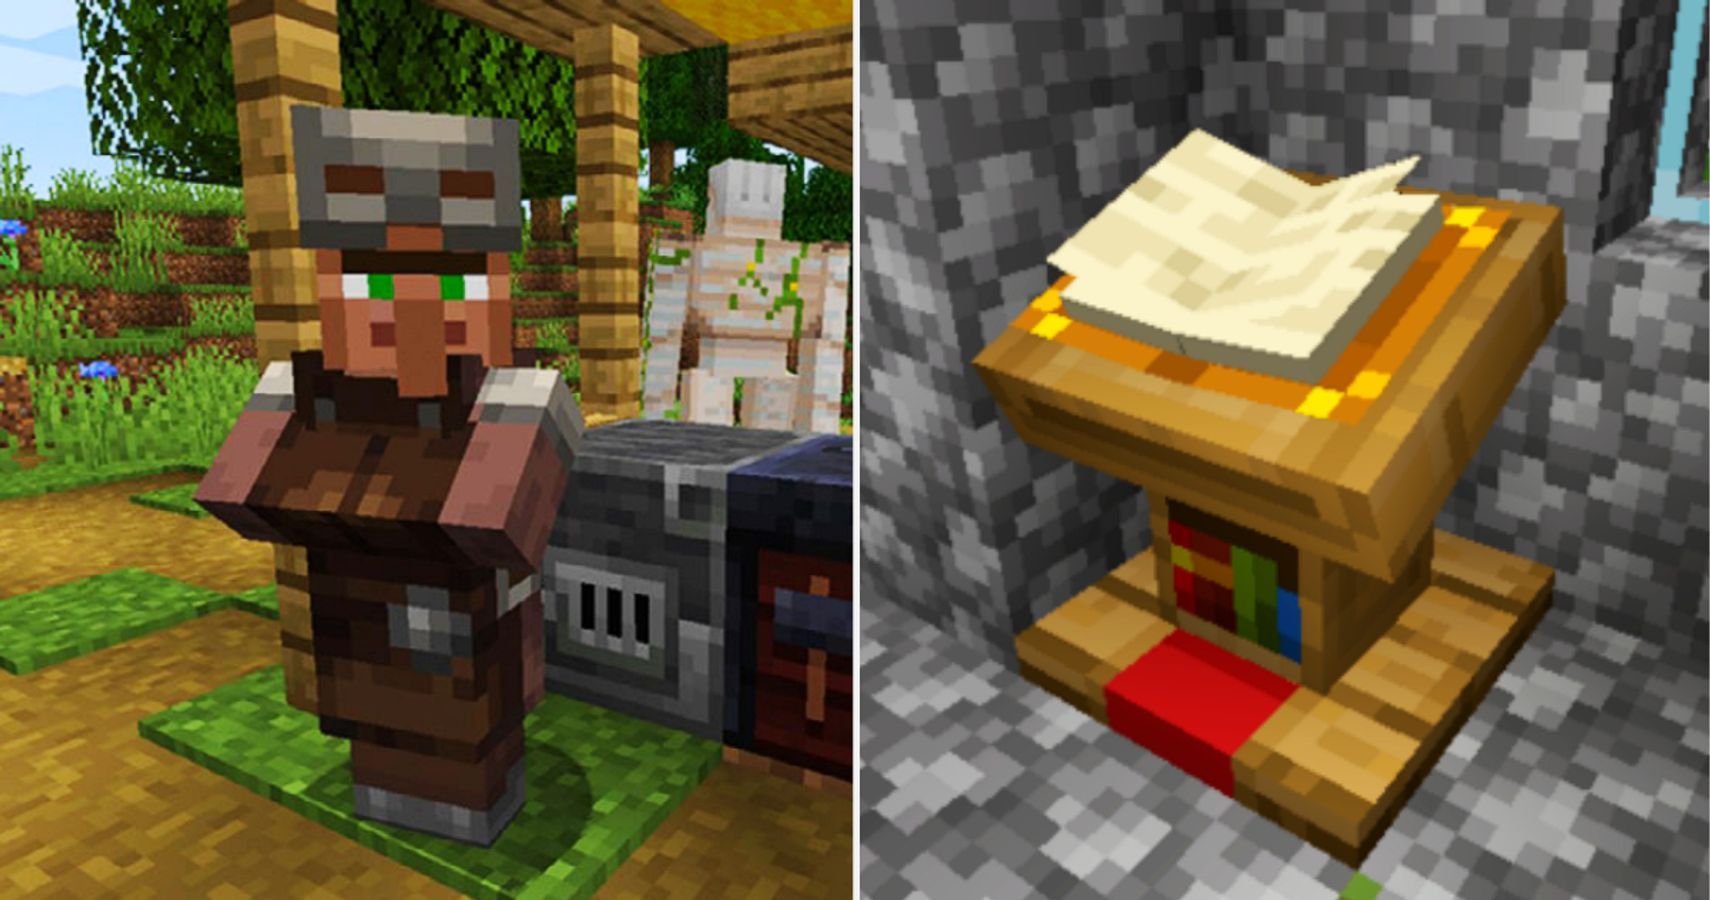 Every Villager Workstation And How It Works In Minecraft